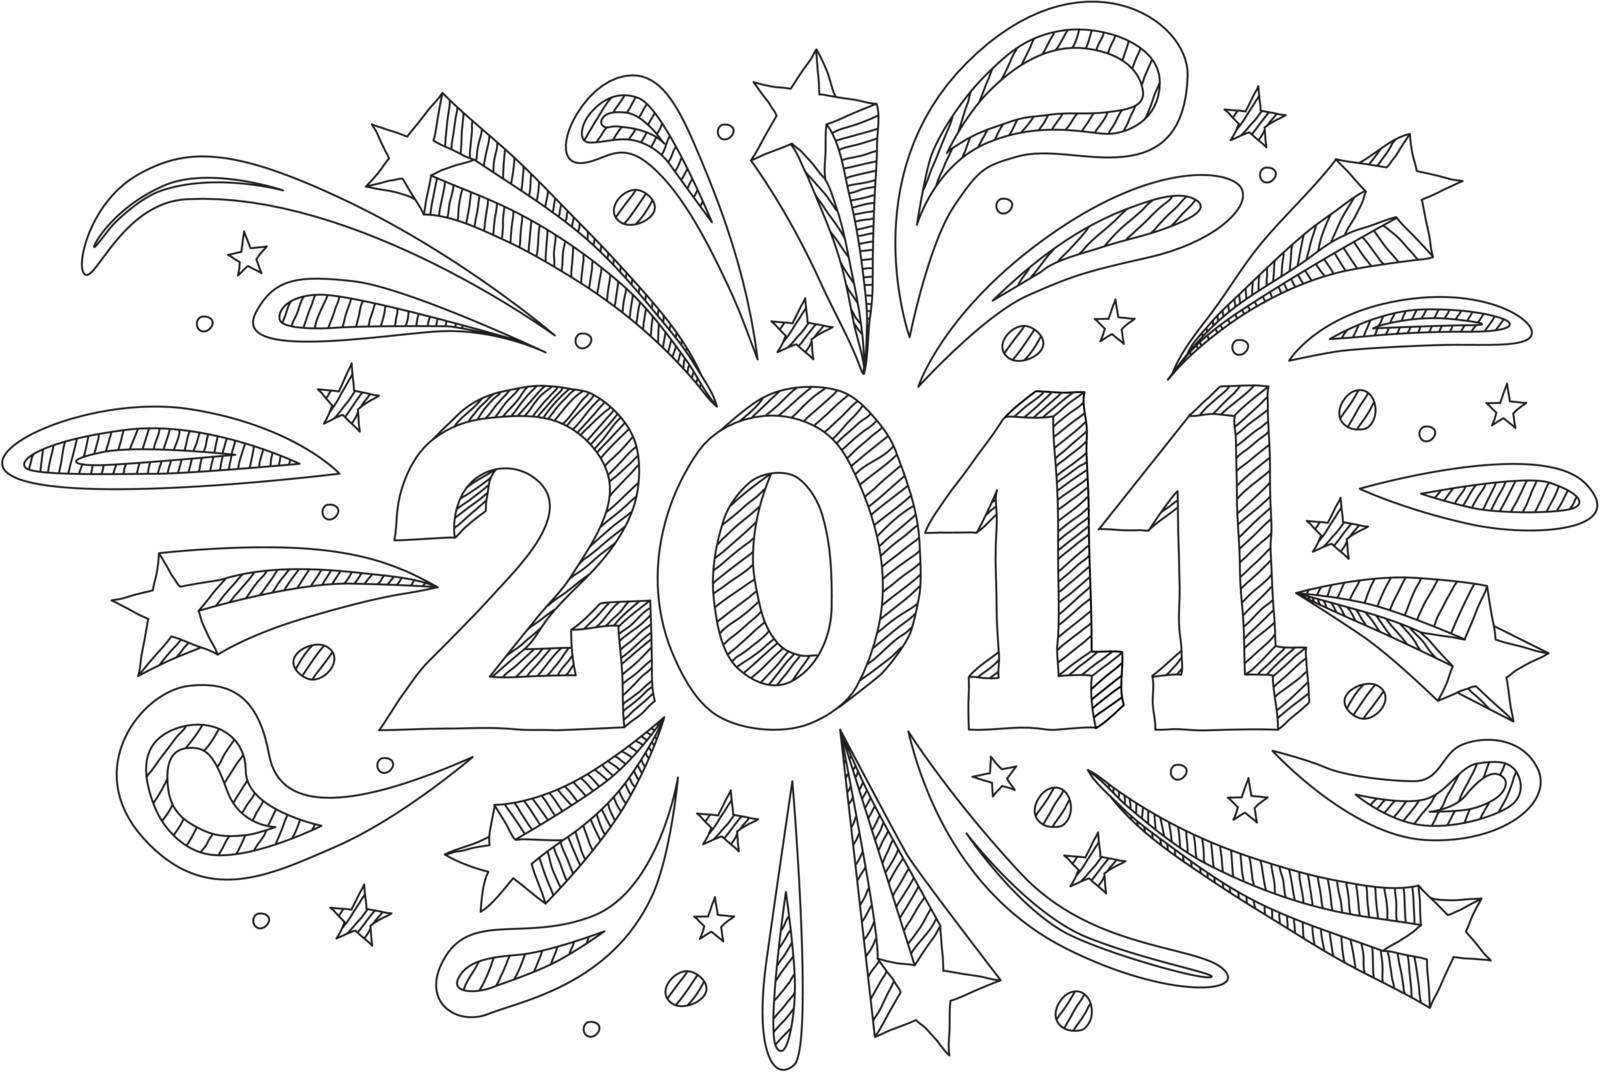 Happy New Year 2011 doodle